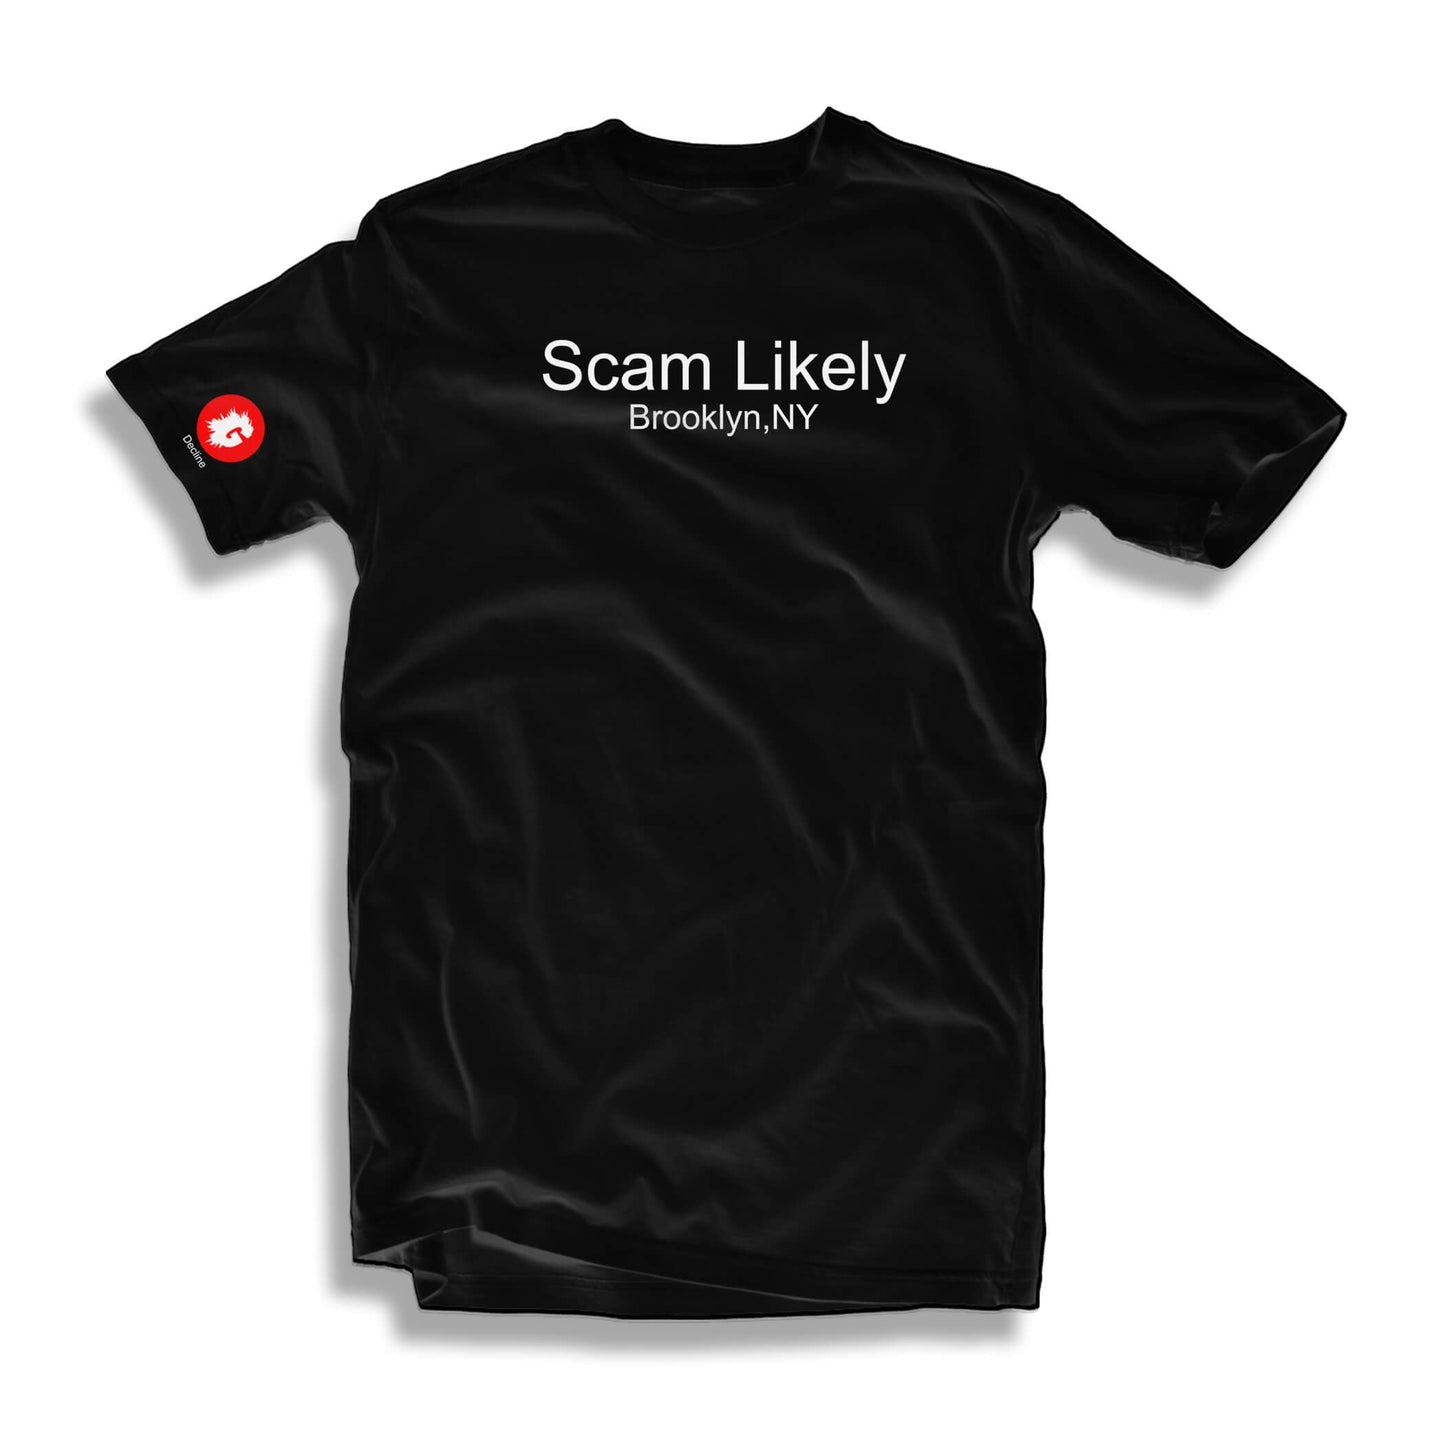 SCAM LIKELY T-SHIRT